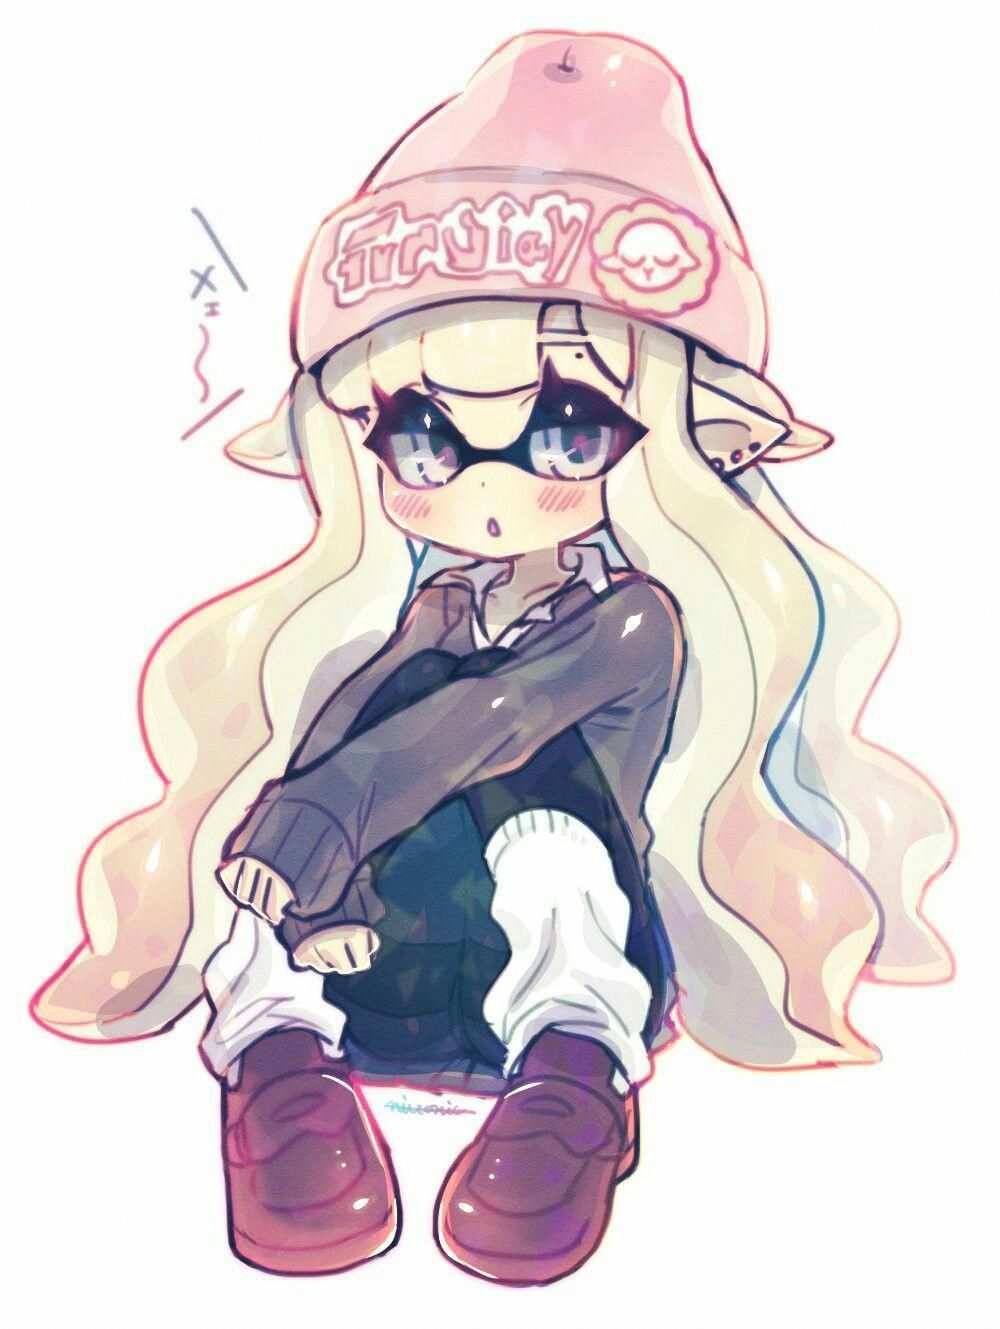 This Is Mira Lynn She S An Inkling Who Likes To Hang Out At Nightclubs She Often Gets